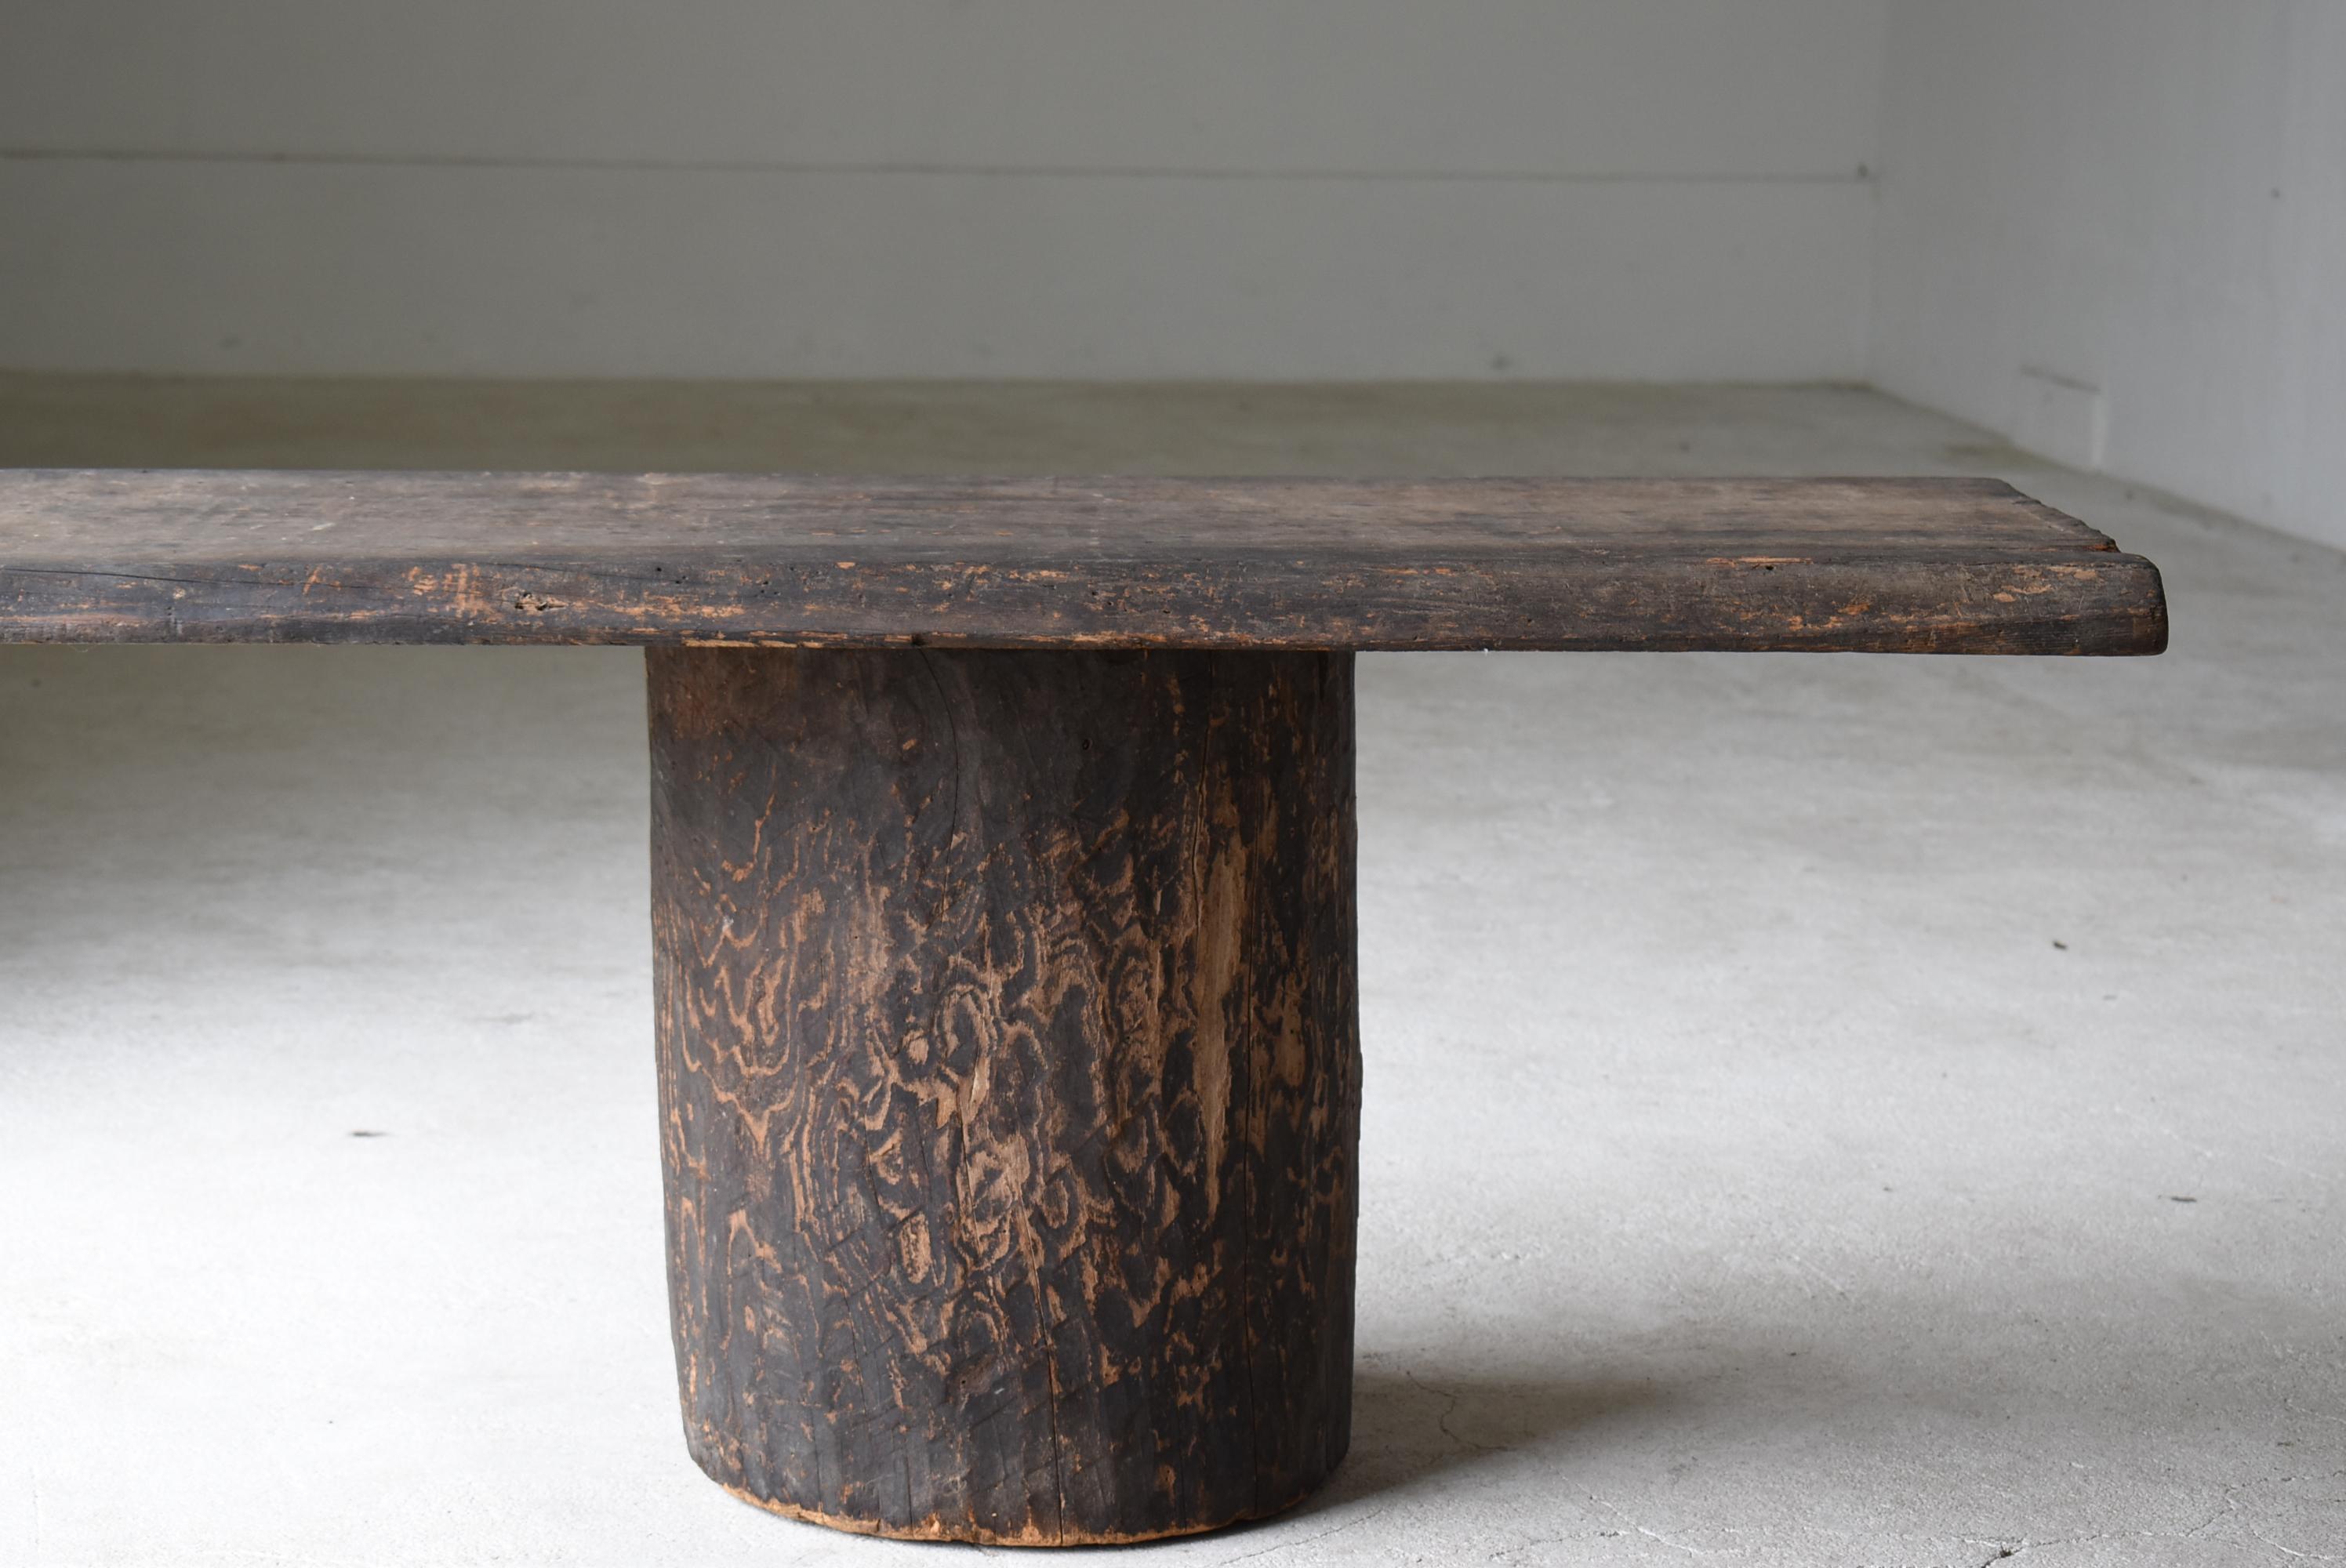 This is an old Japanese coffee table.
It is from the Meiji period (1860s-1900s).

It is constructed of a beautifully grained stump topped with a single piece of wood.
The top and base are both made of cedar.

It is powerful and has a strong